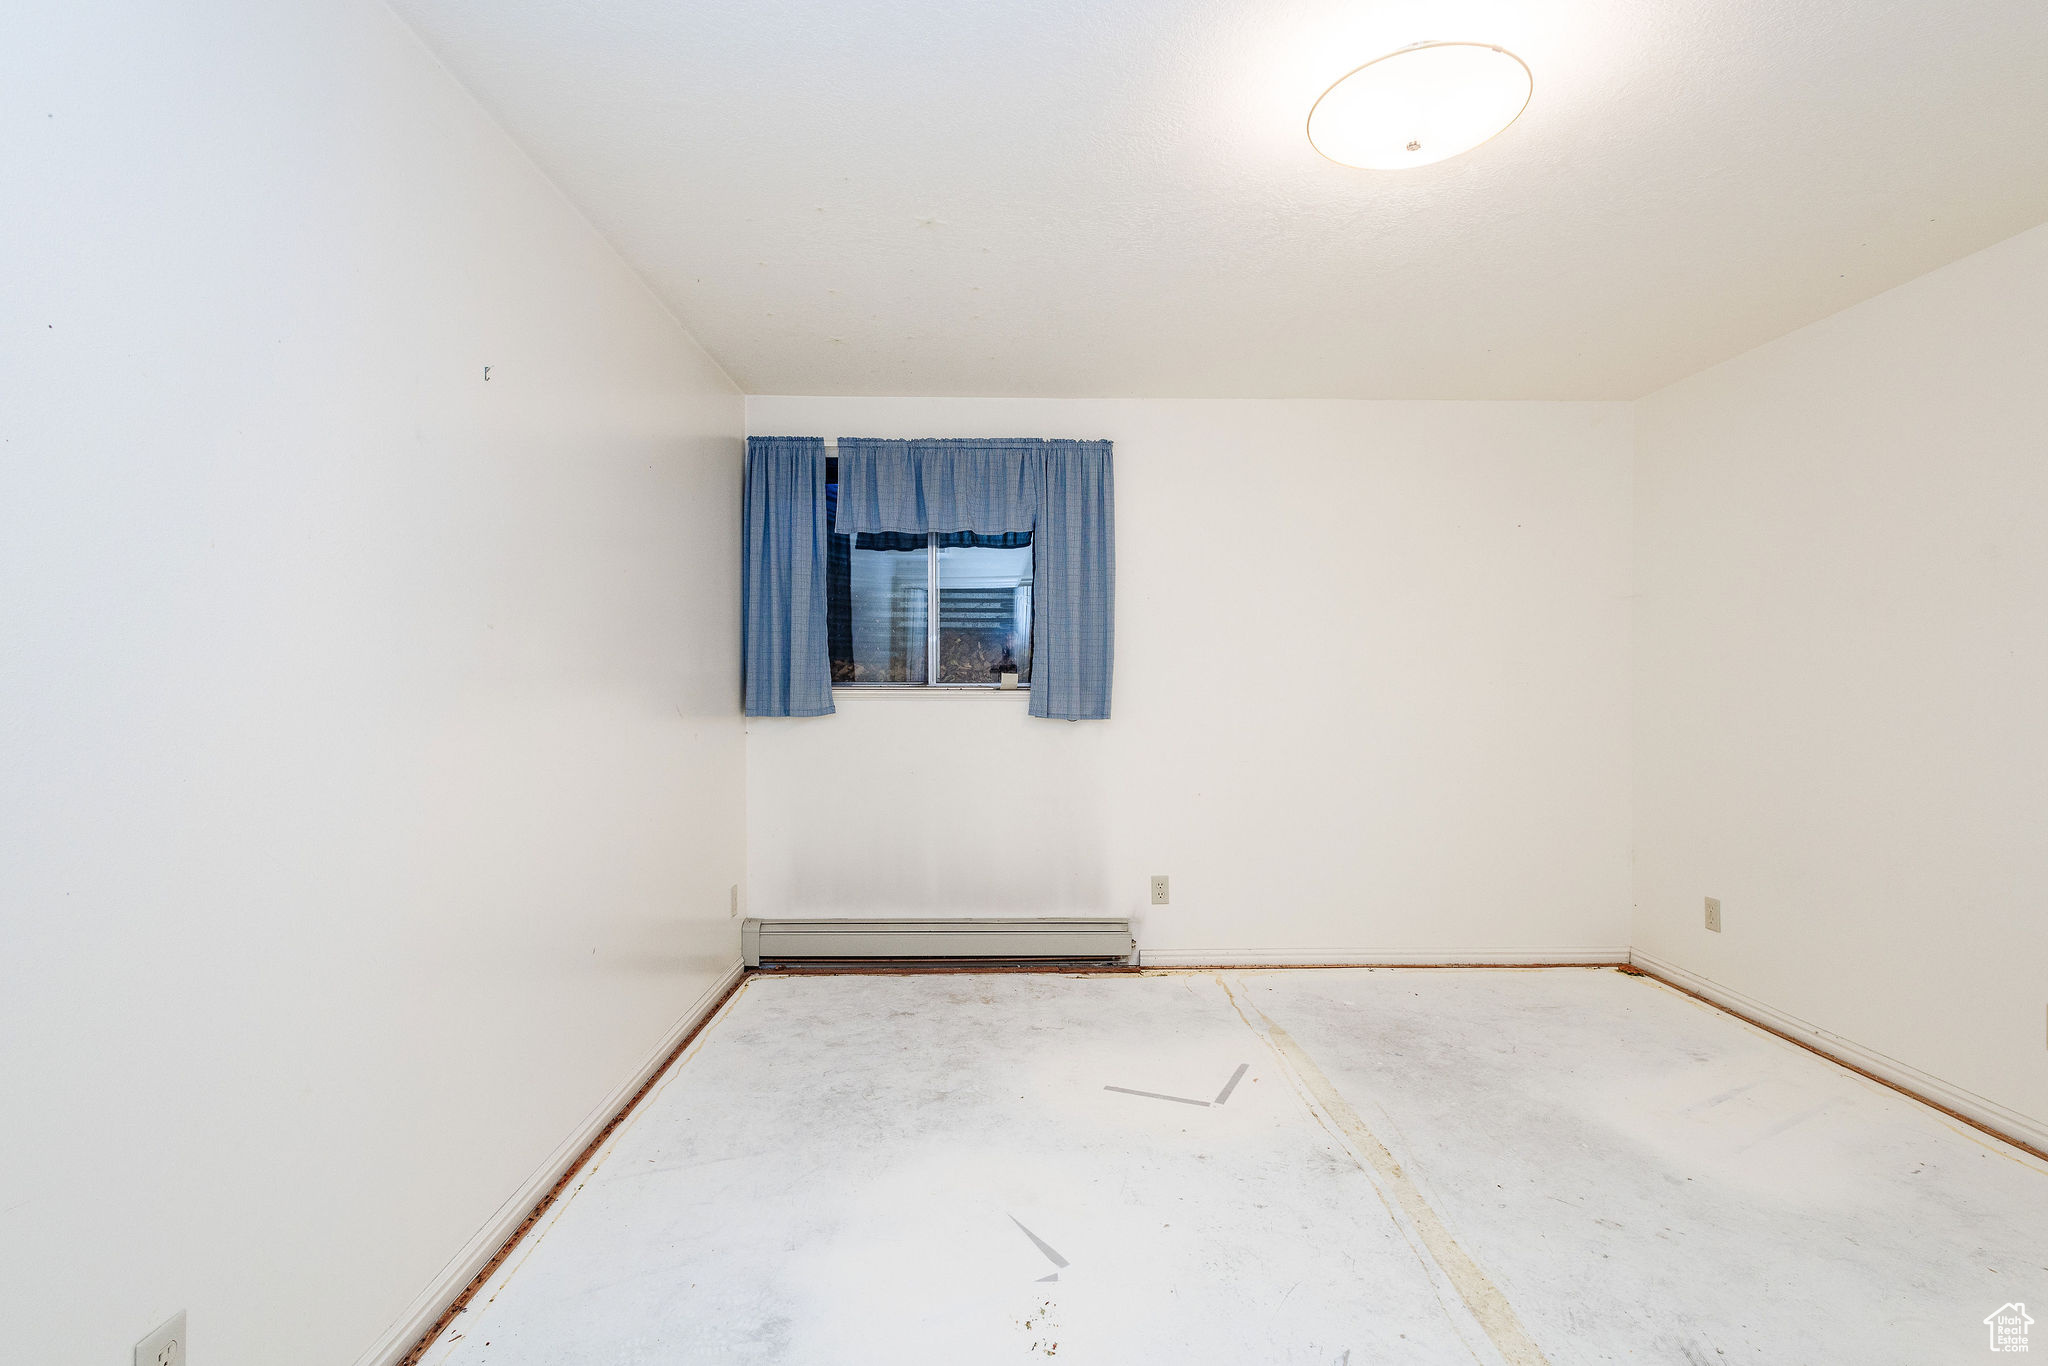 Unfurnished room with a baseboard heating unit